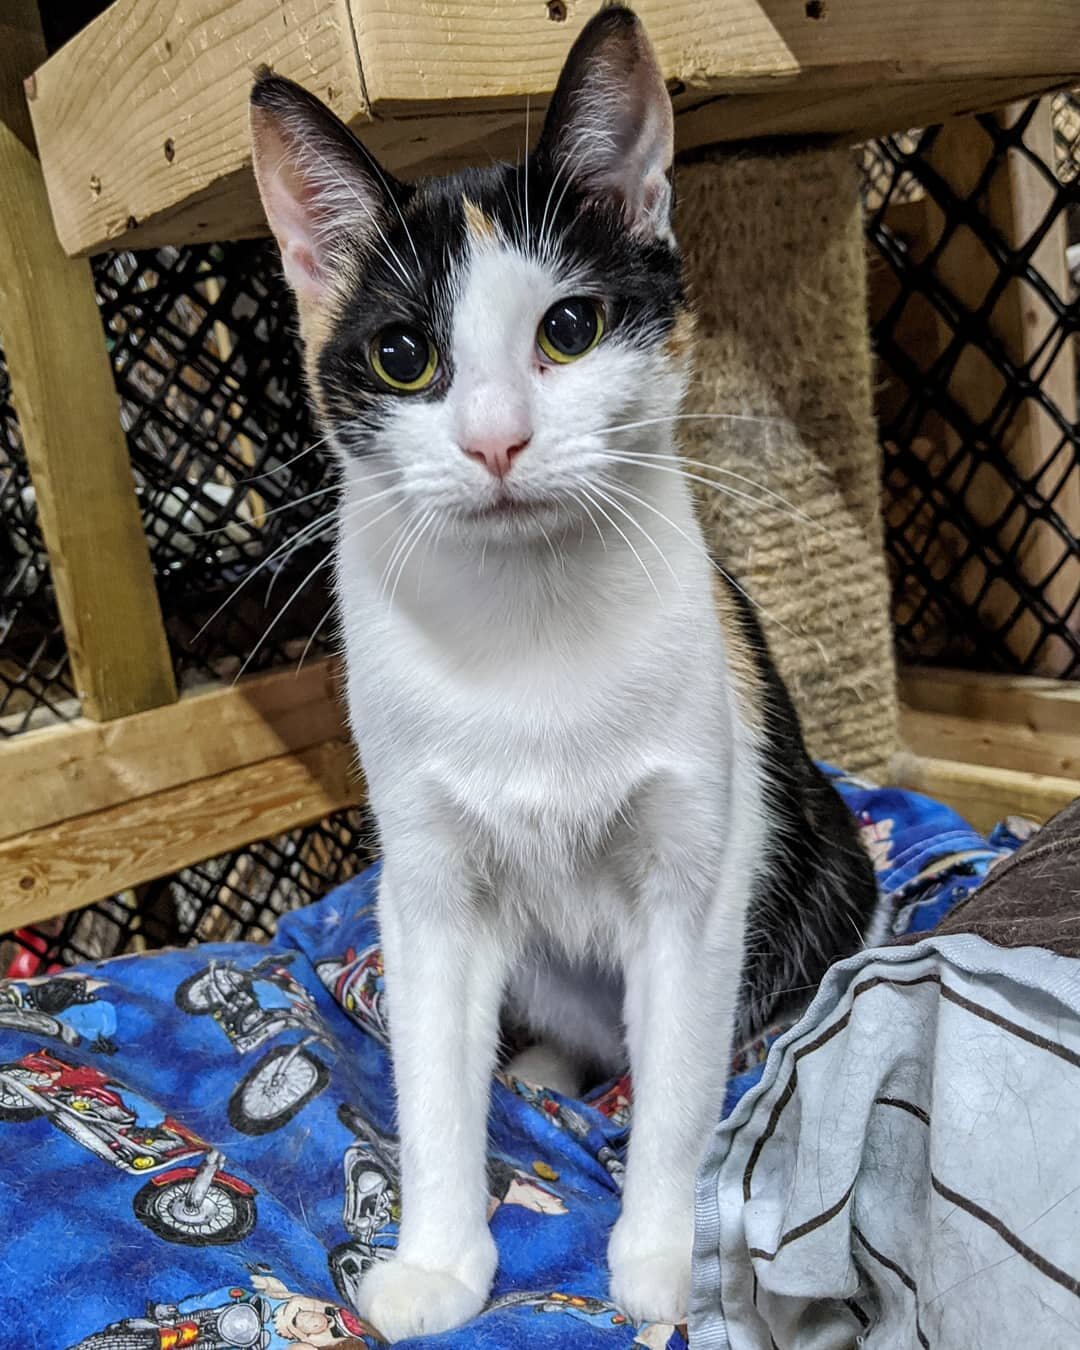 Shaw (F) FIV+. DOB August 15, 2019
Beautiful Shaw is another one of our wonderful FIV+ kitties who is looking for a home. She is a friendly, laid back girl who gets along great with other kitties. At PCON we believe every kitty deserves to find their